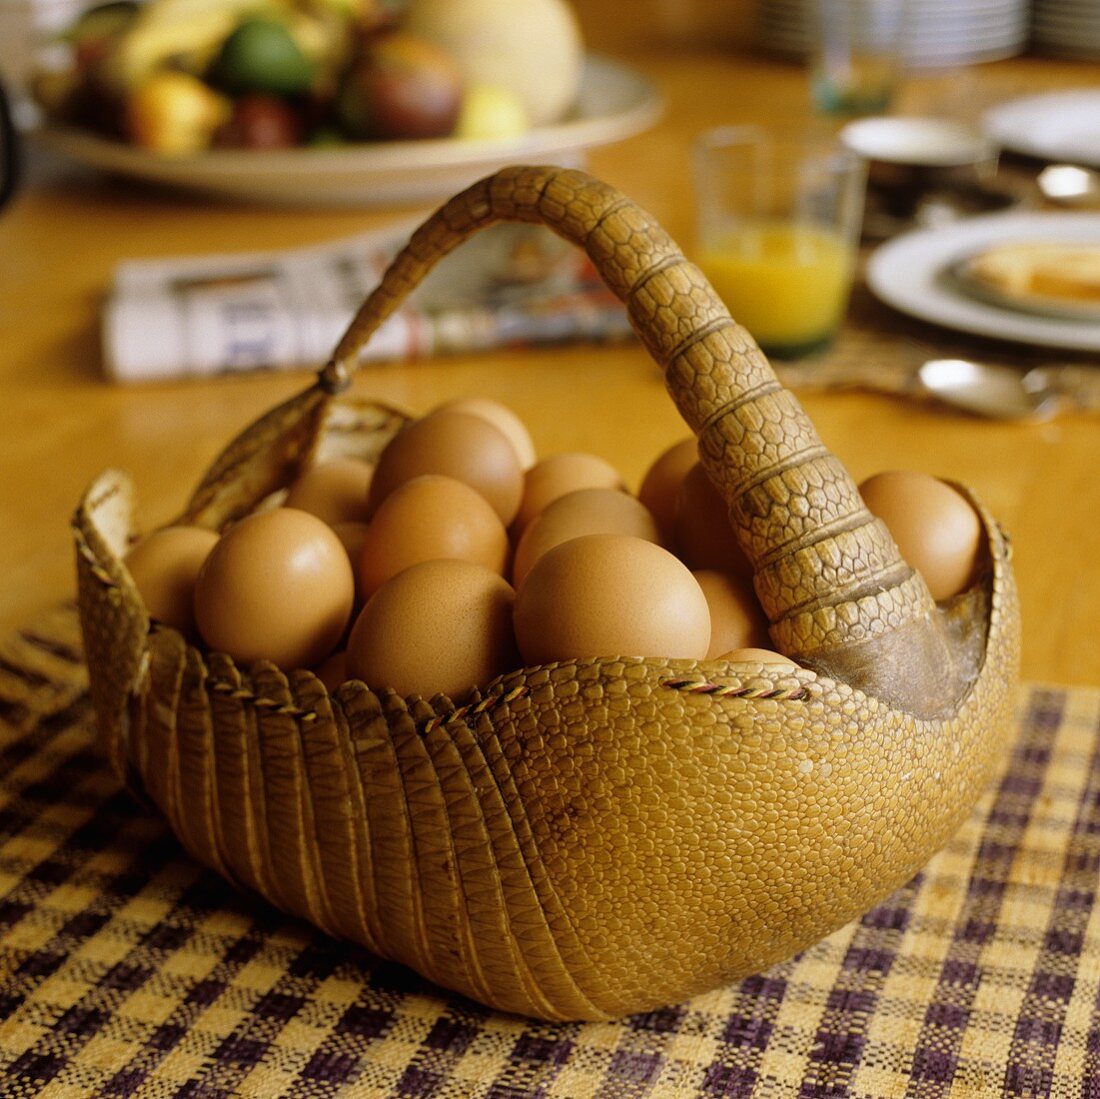 An animal skin basket of eggs on a checked cloth